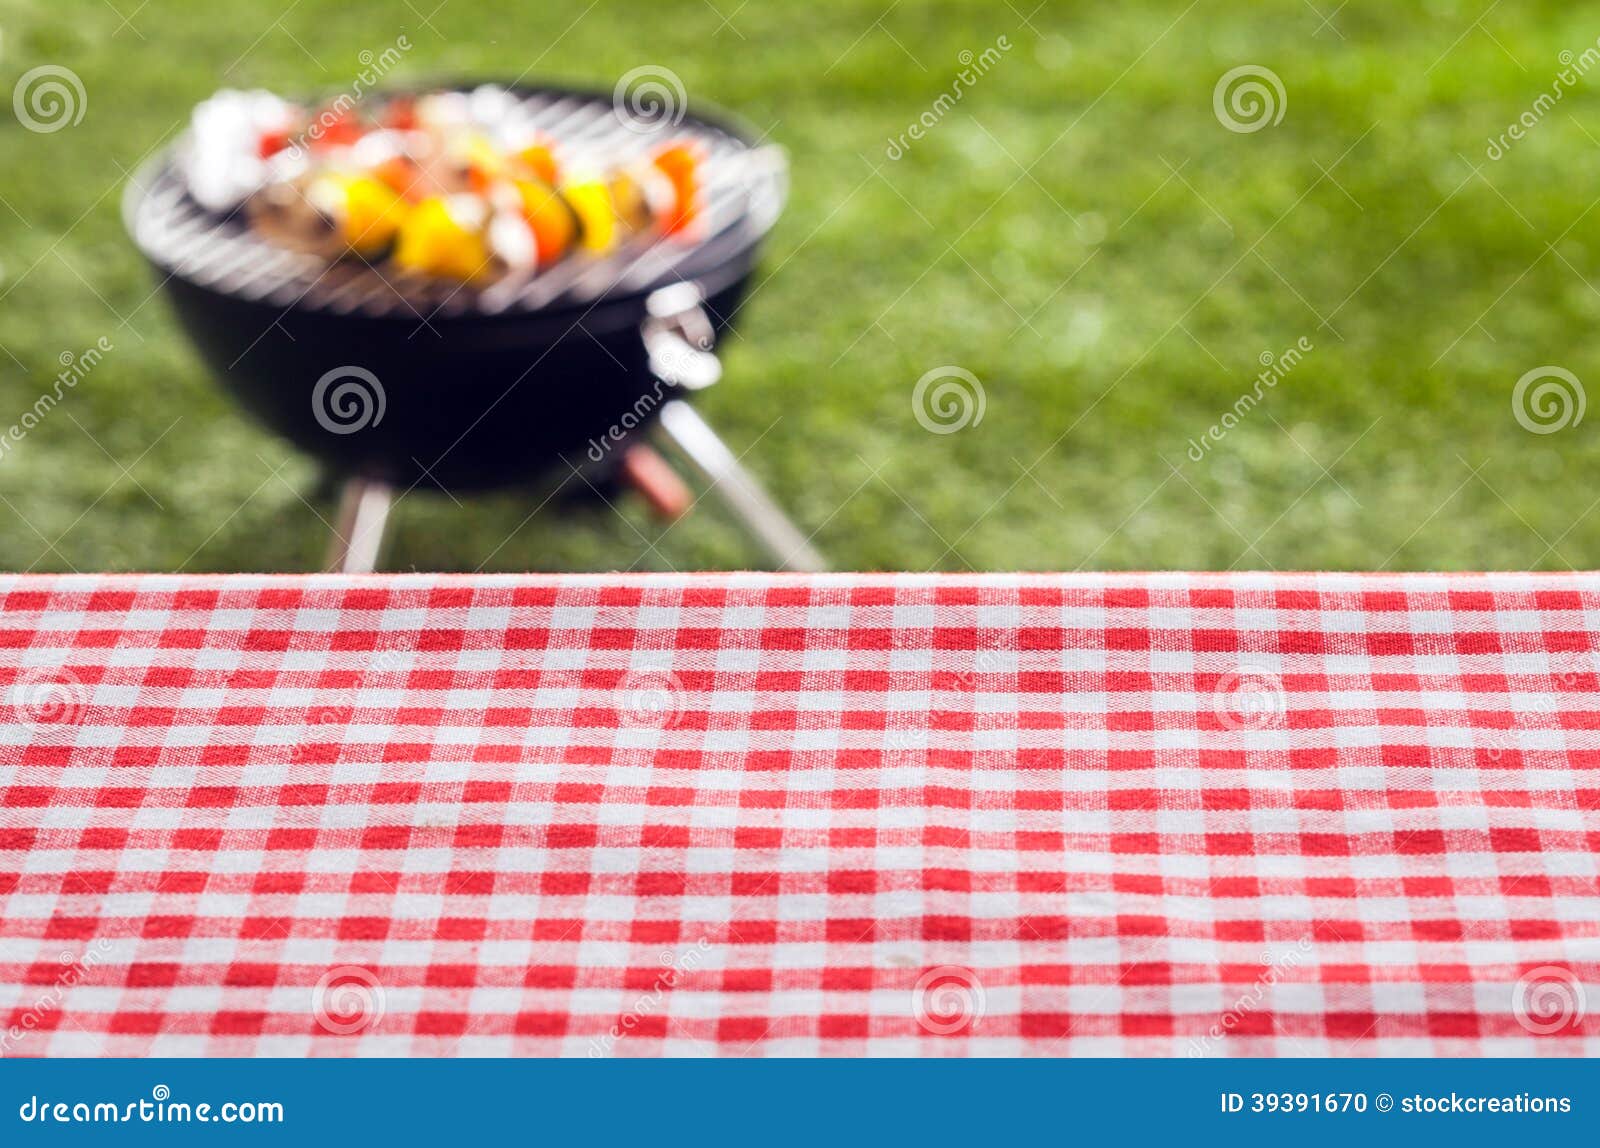 empty picnic table background